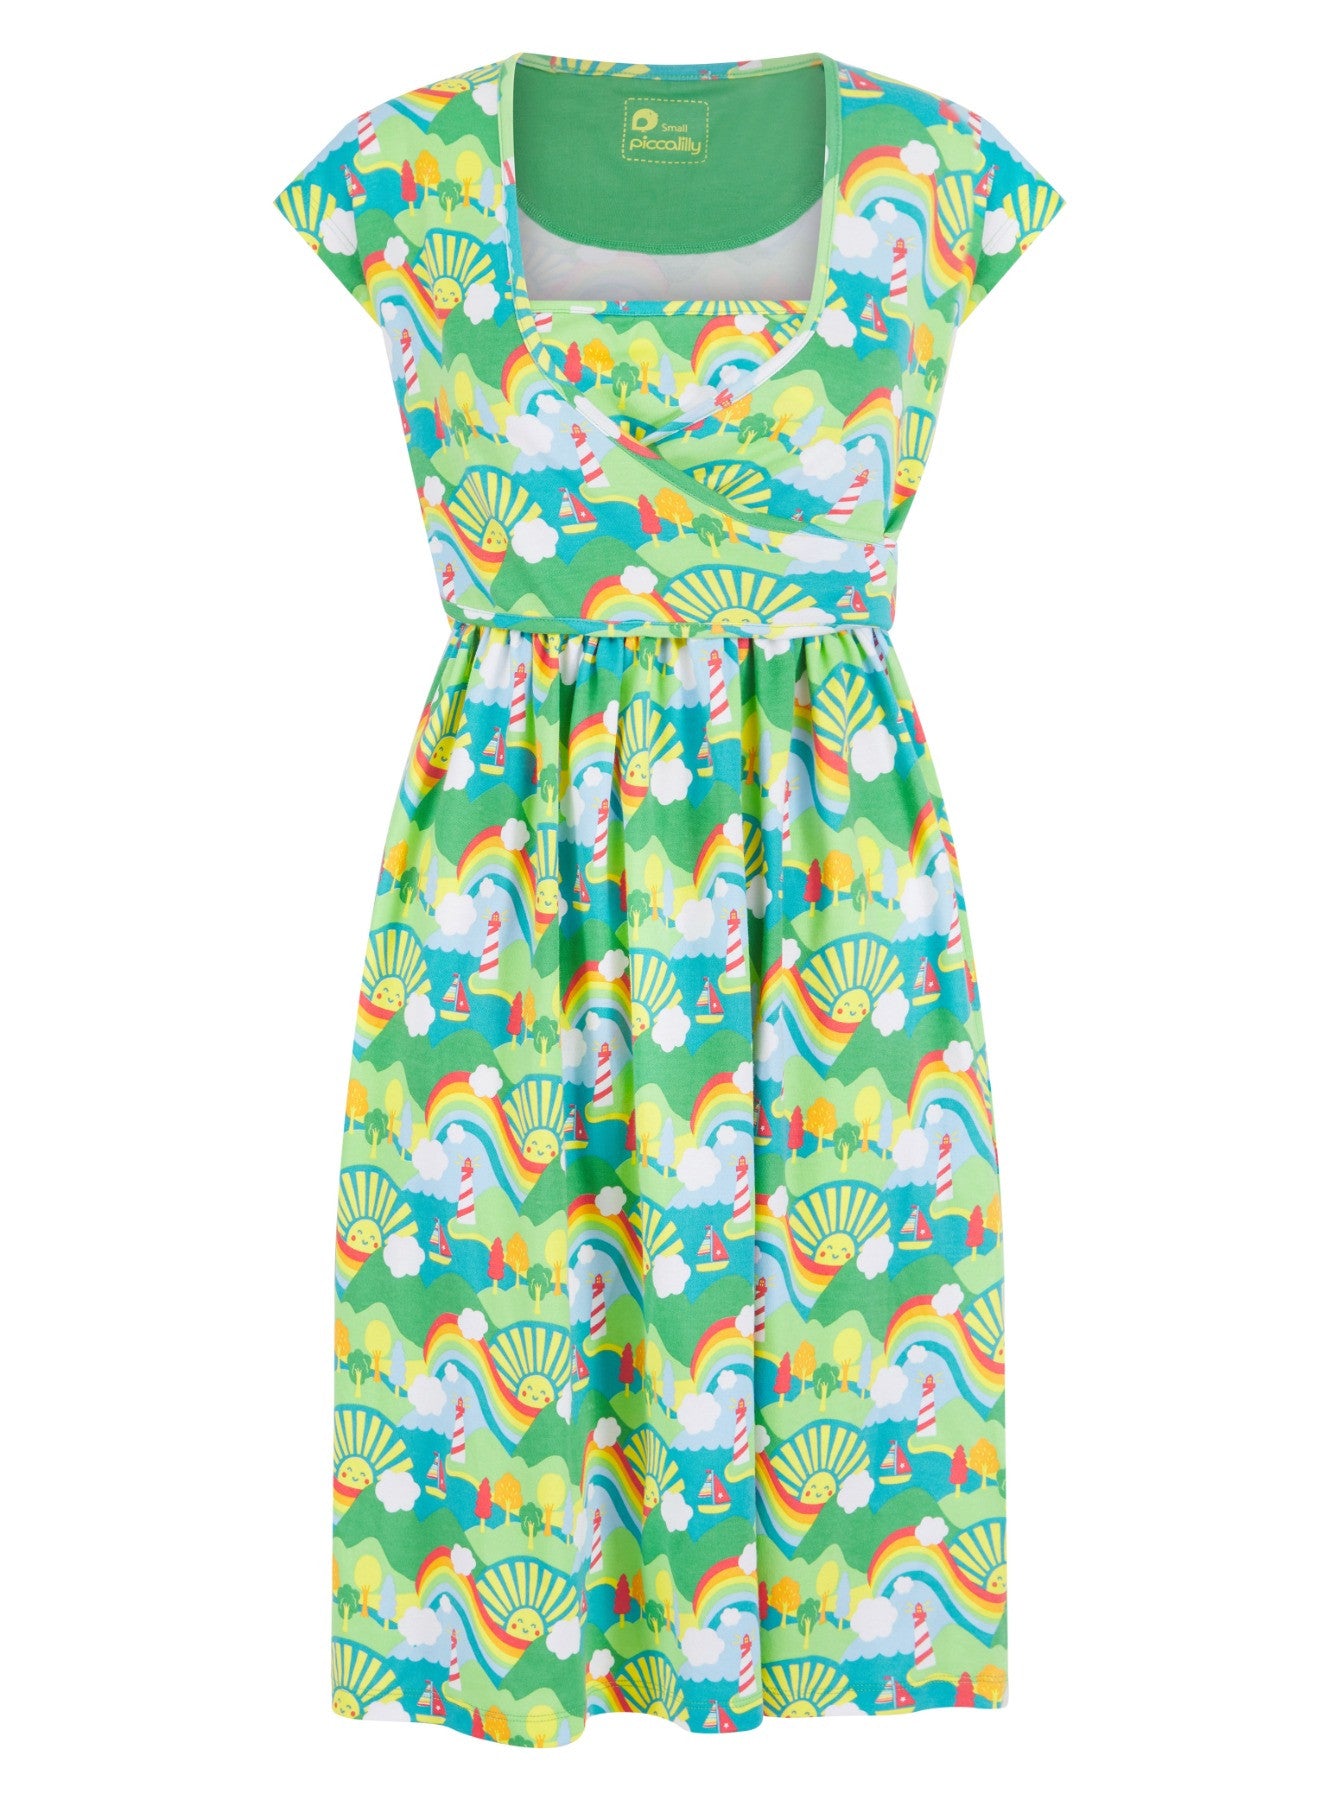 Piccalilly Women's Wrap Dress - Island Life